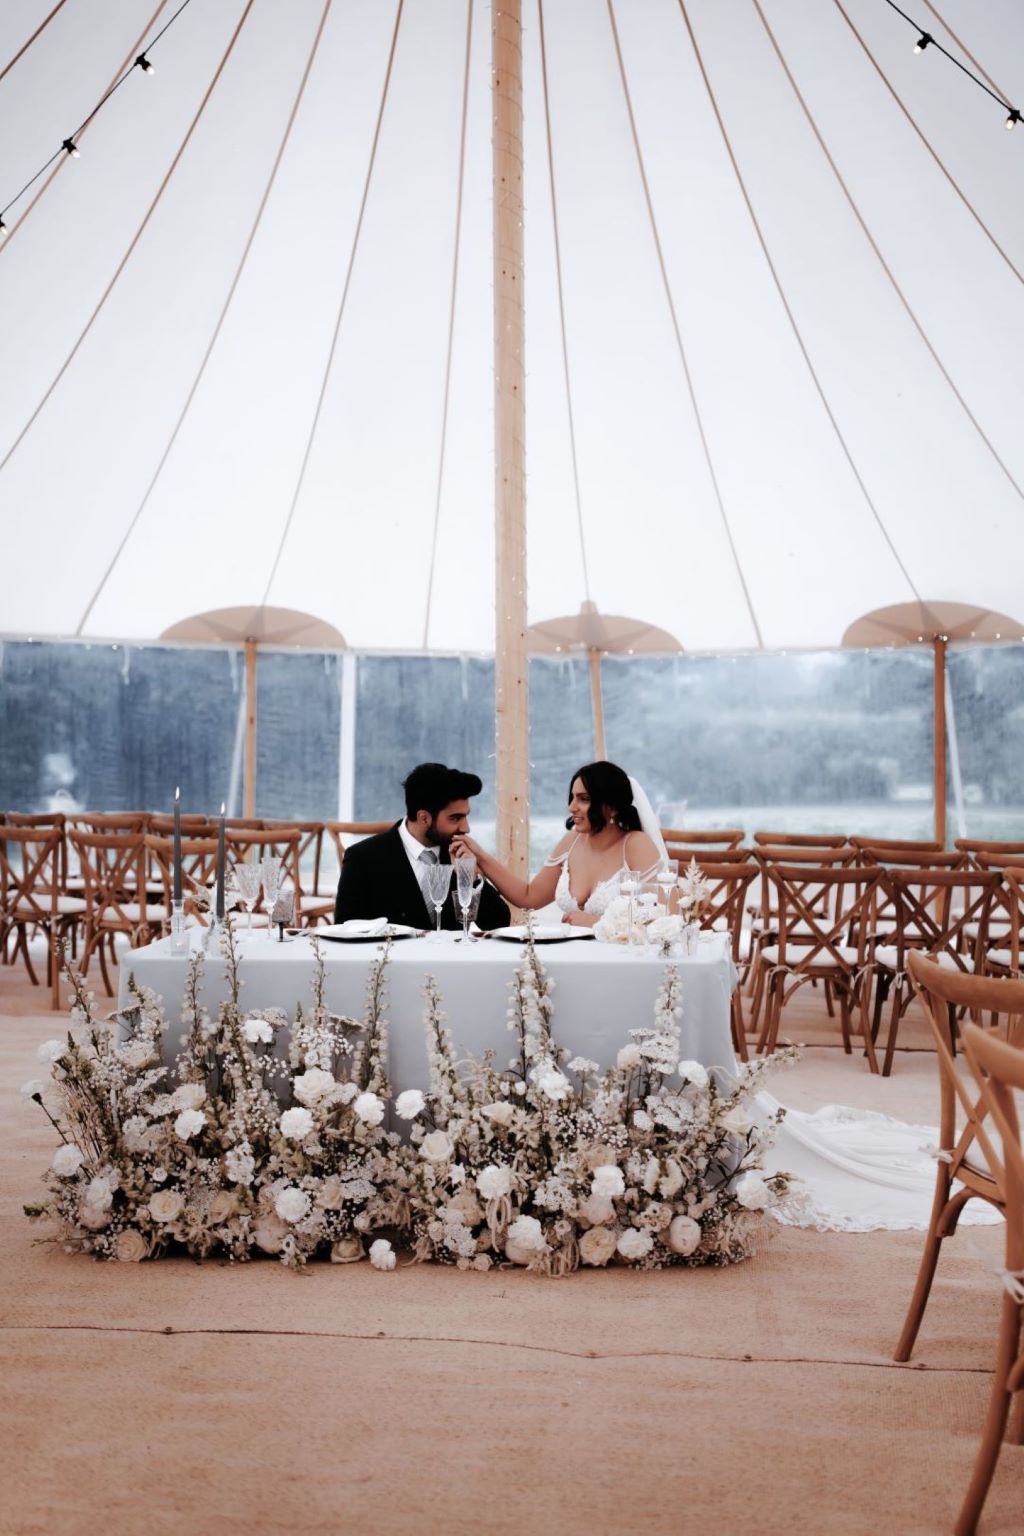 Styled wedding photoshoot with Wonderful Events on English Wedding. A bride and groom wearing black tie and white dress with all white flowers and grey tableware with smoky glass